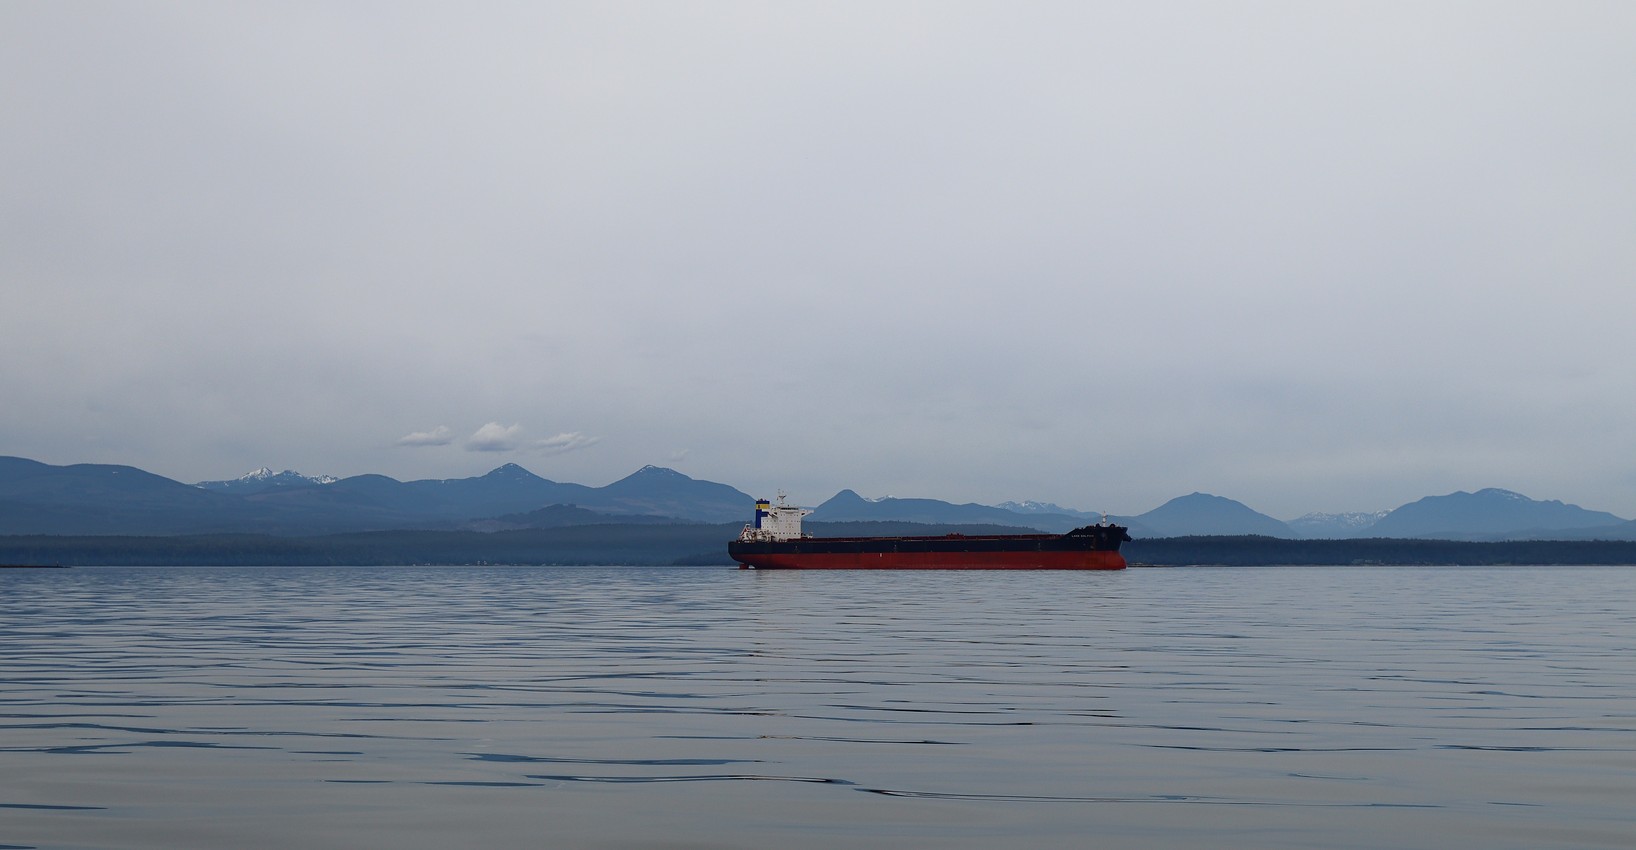 A bulk carrier waits to take on cargo